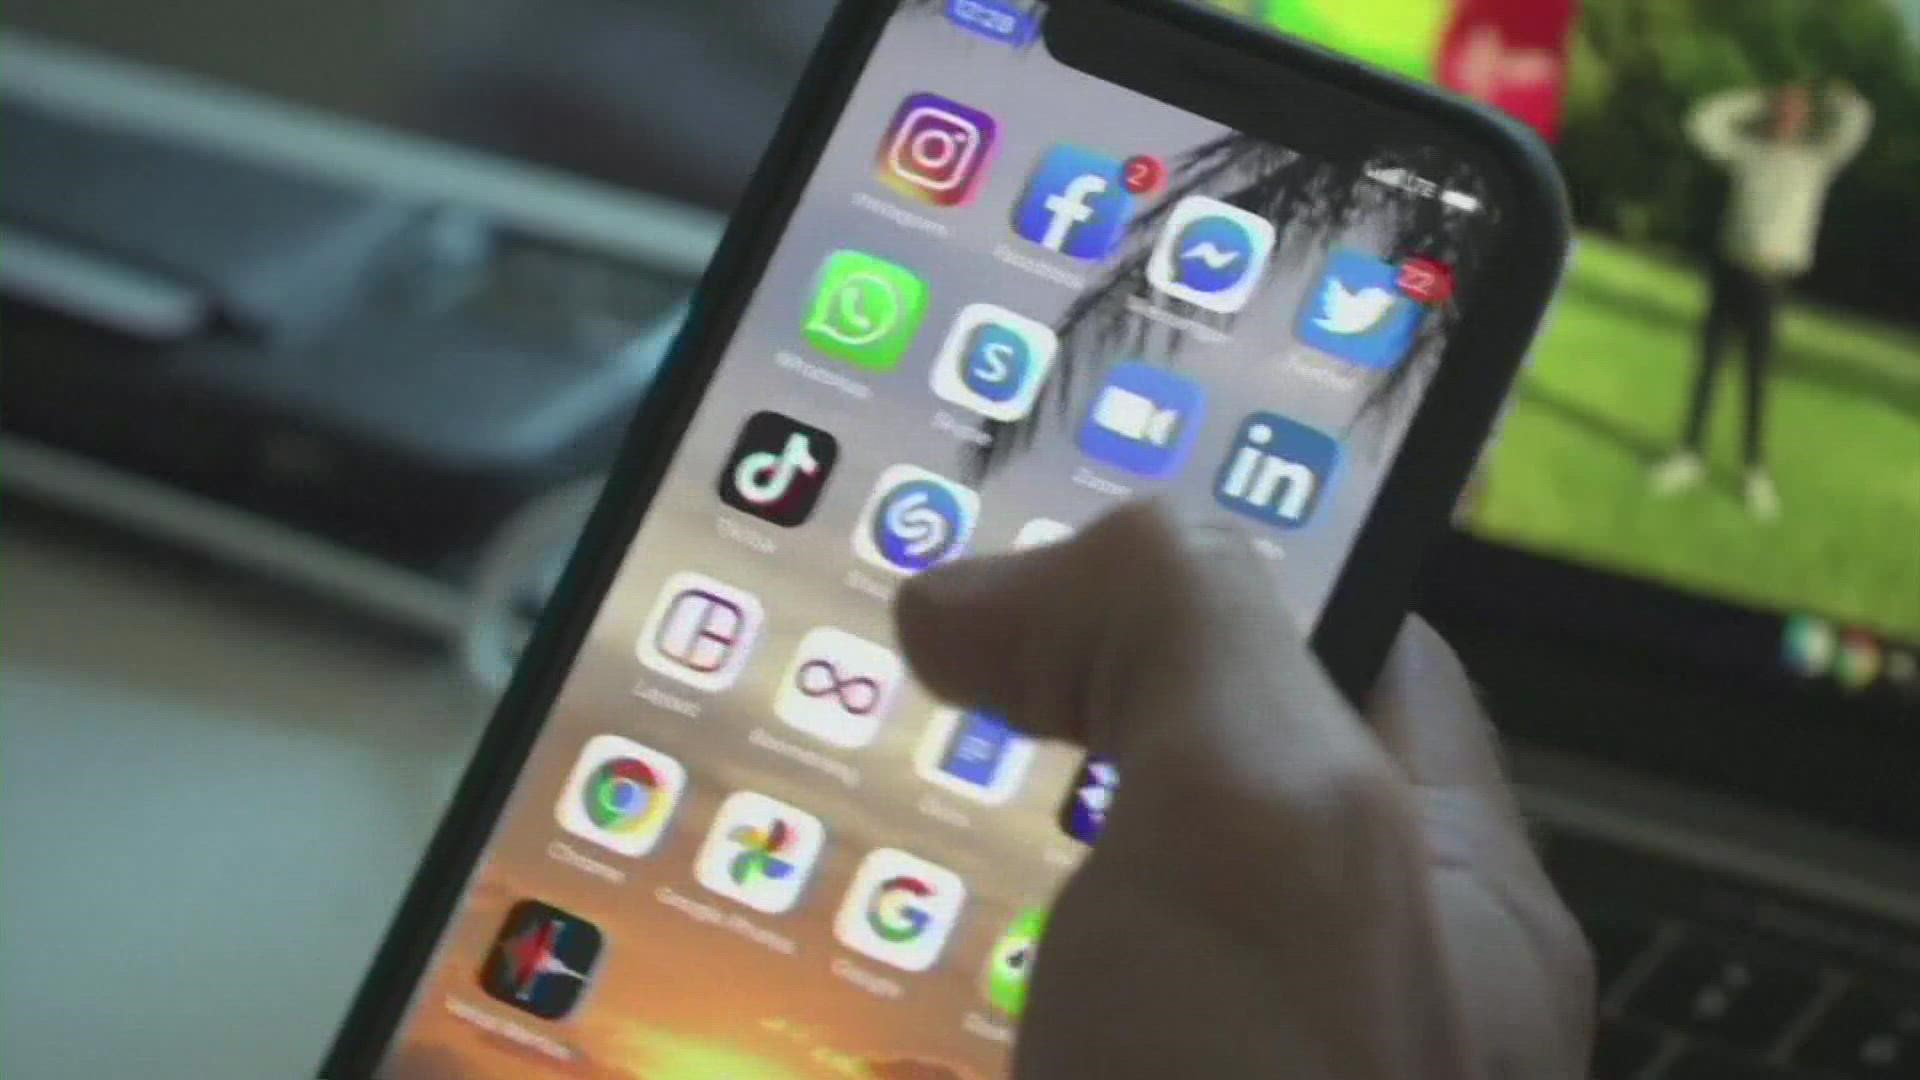 Maine joins more than 20 states, along with the federal government, in banning the social media platform on government-owned devices.